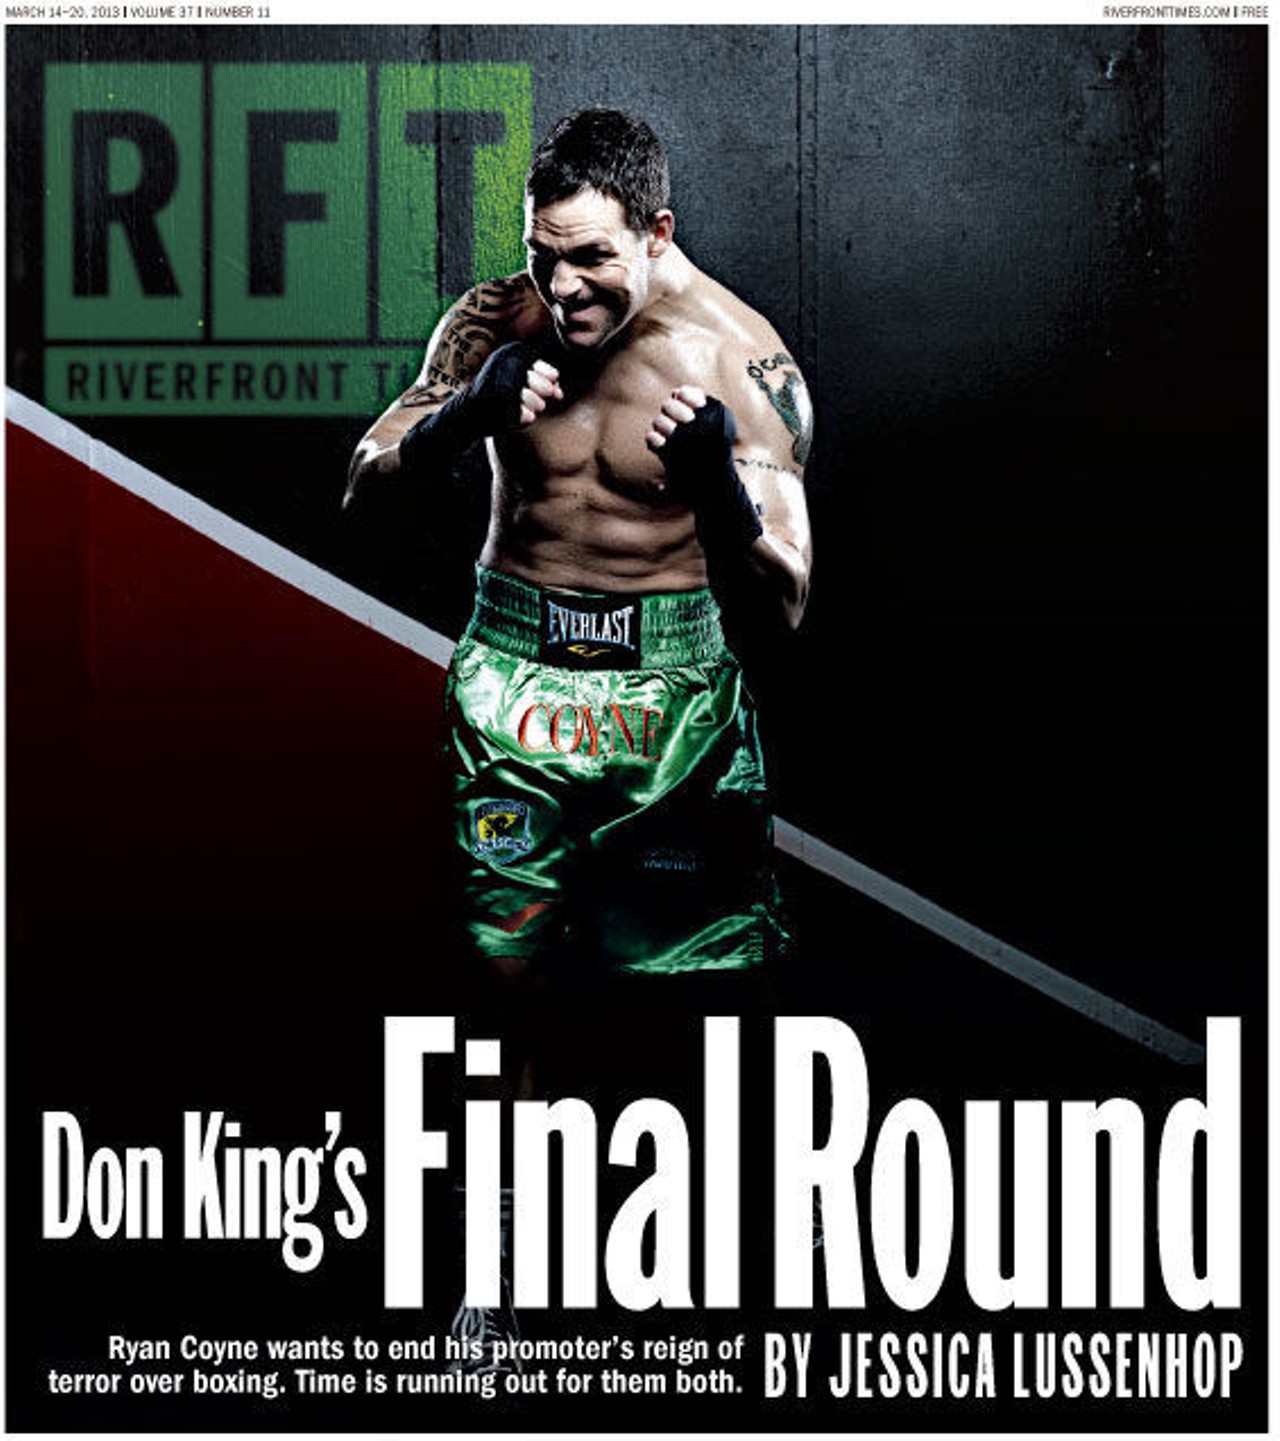 March 14
Read "Don King's Final Round."